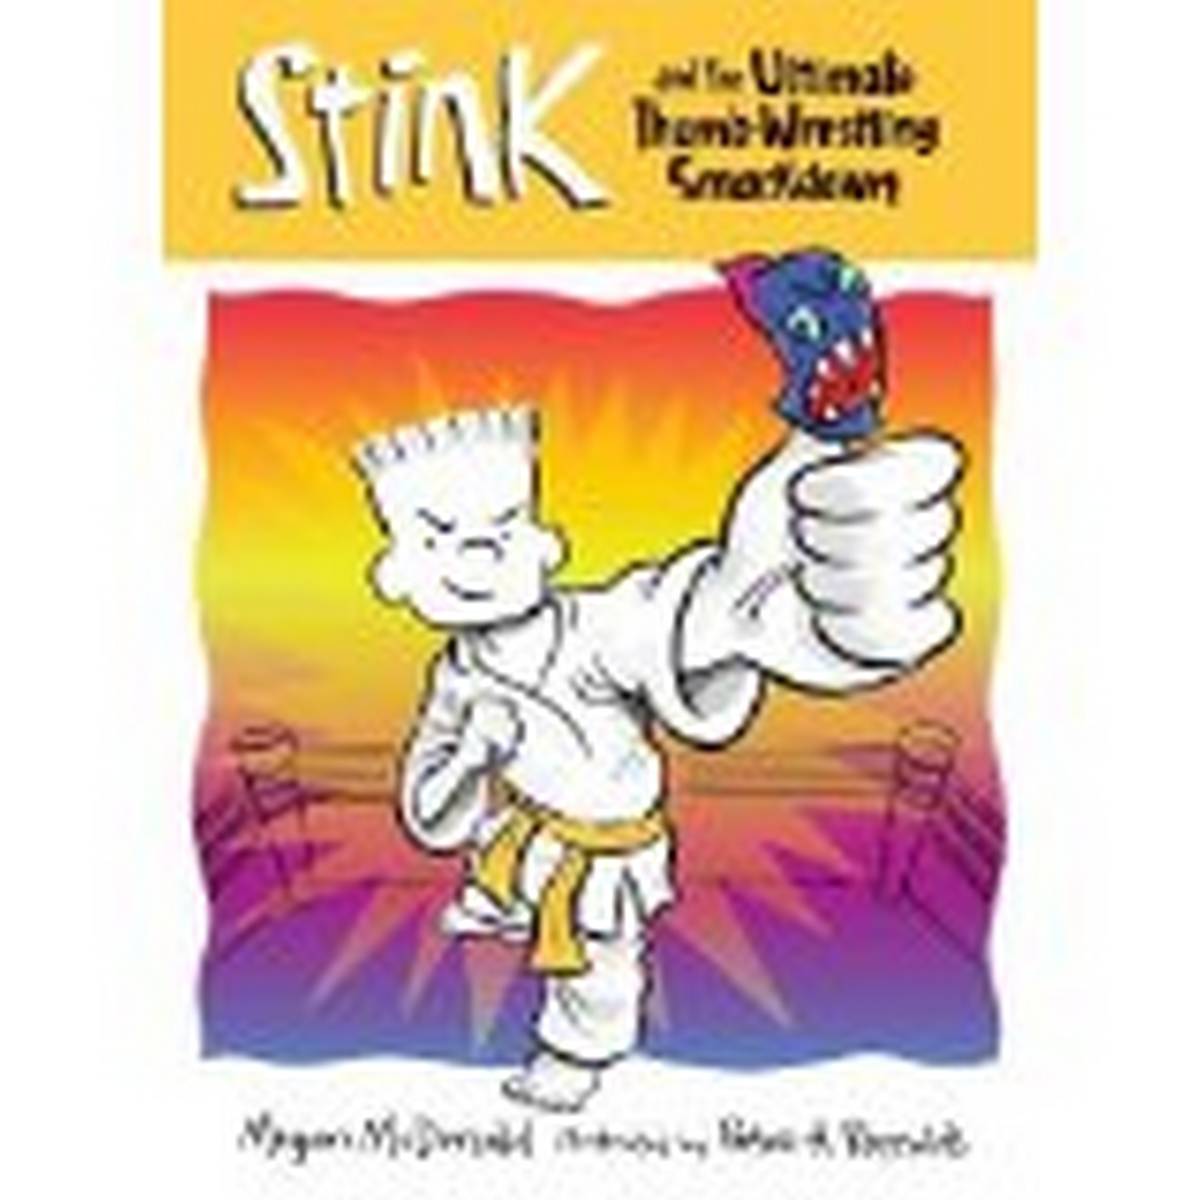 Stink 6 and the Ultimate Thumb-Wrestling Smackdown